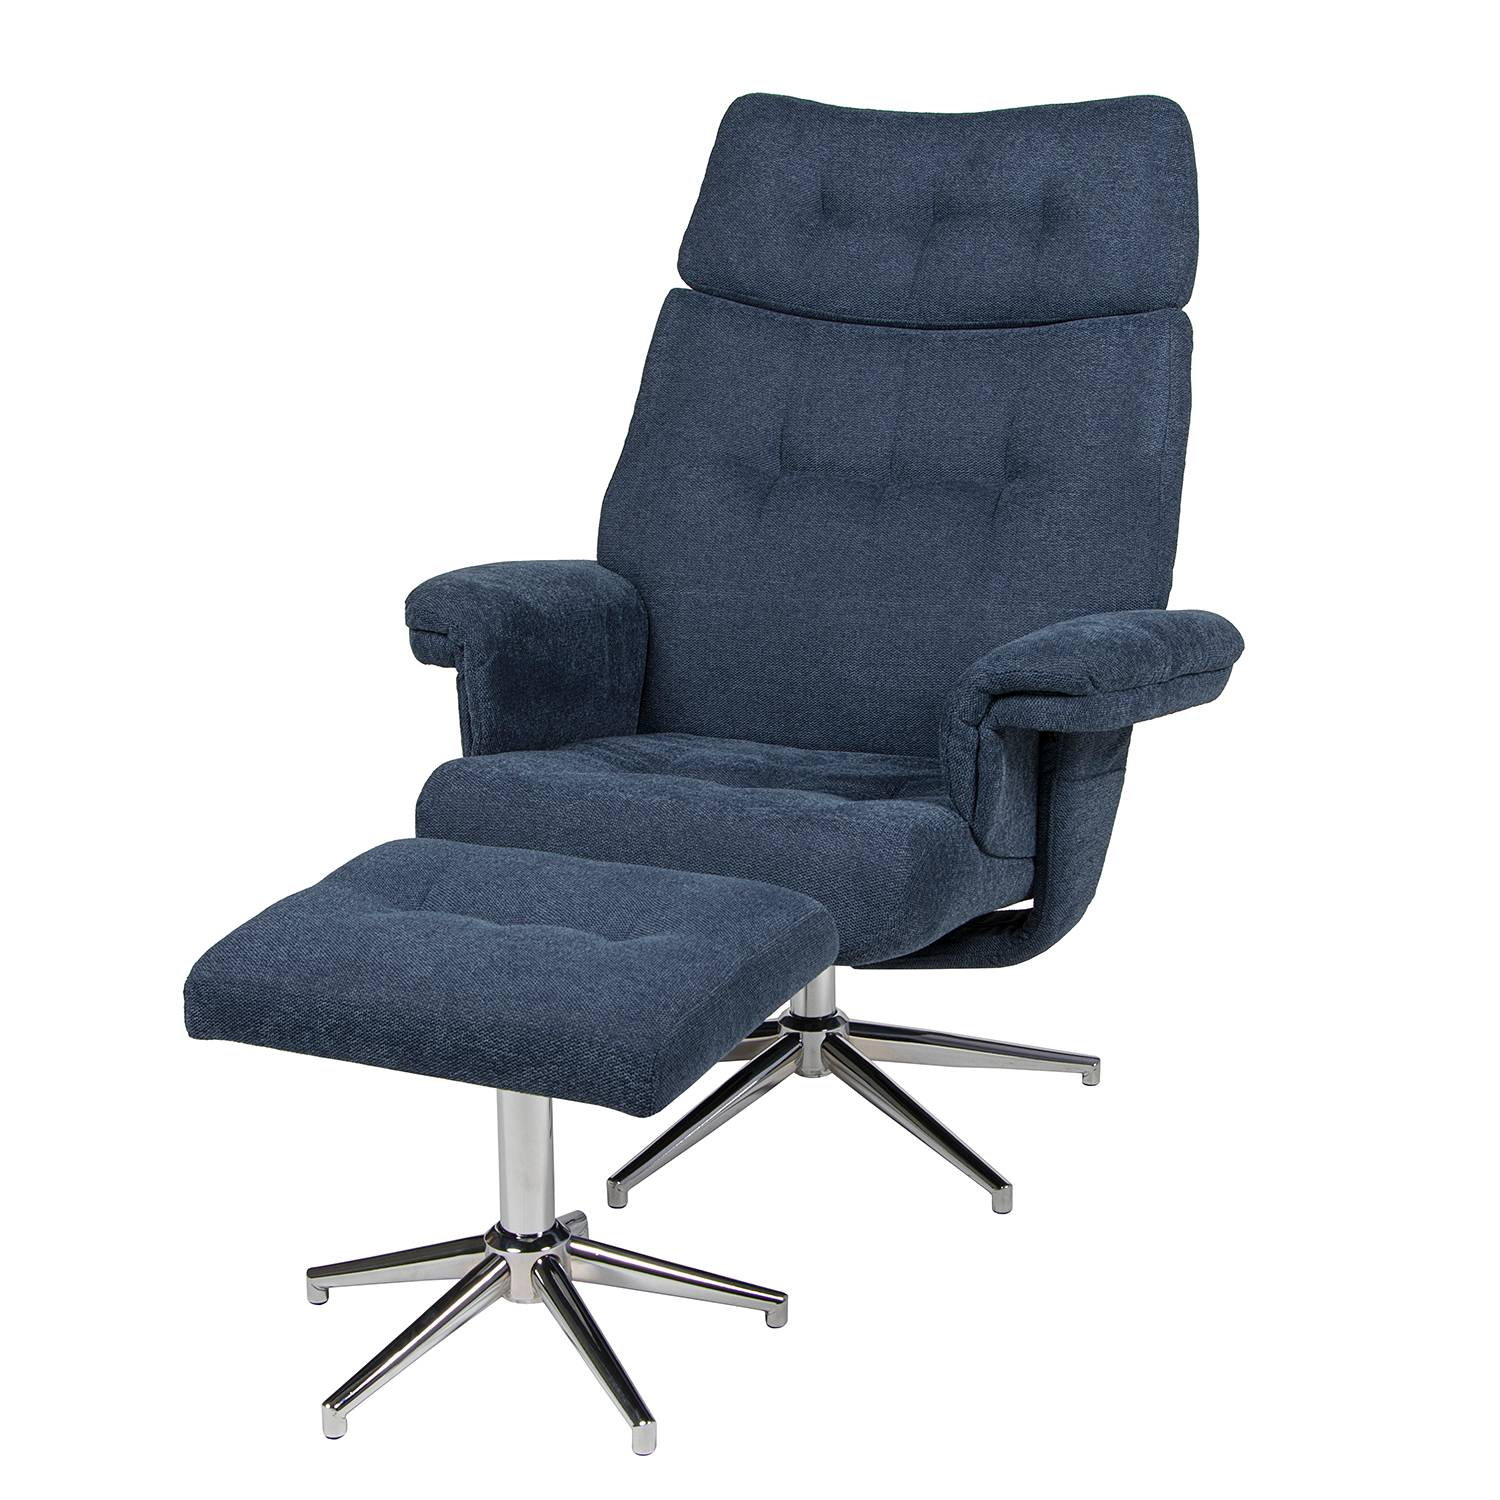 Image of Fauteuil relax Peers 000000001000216305